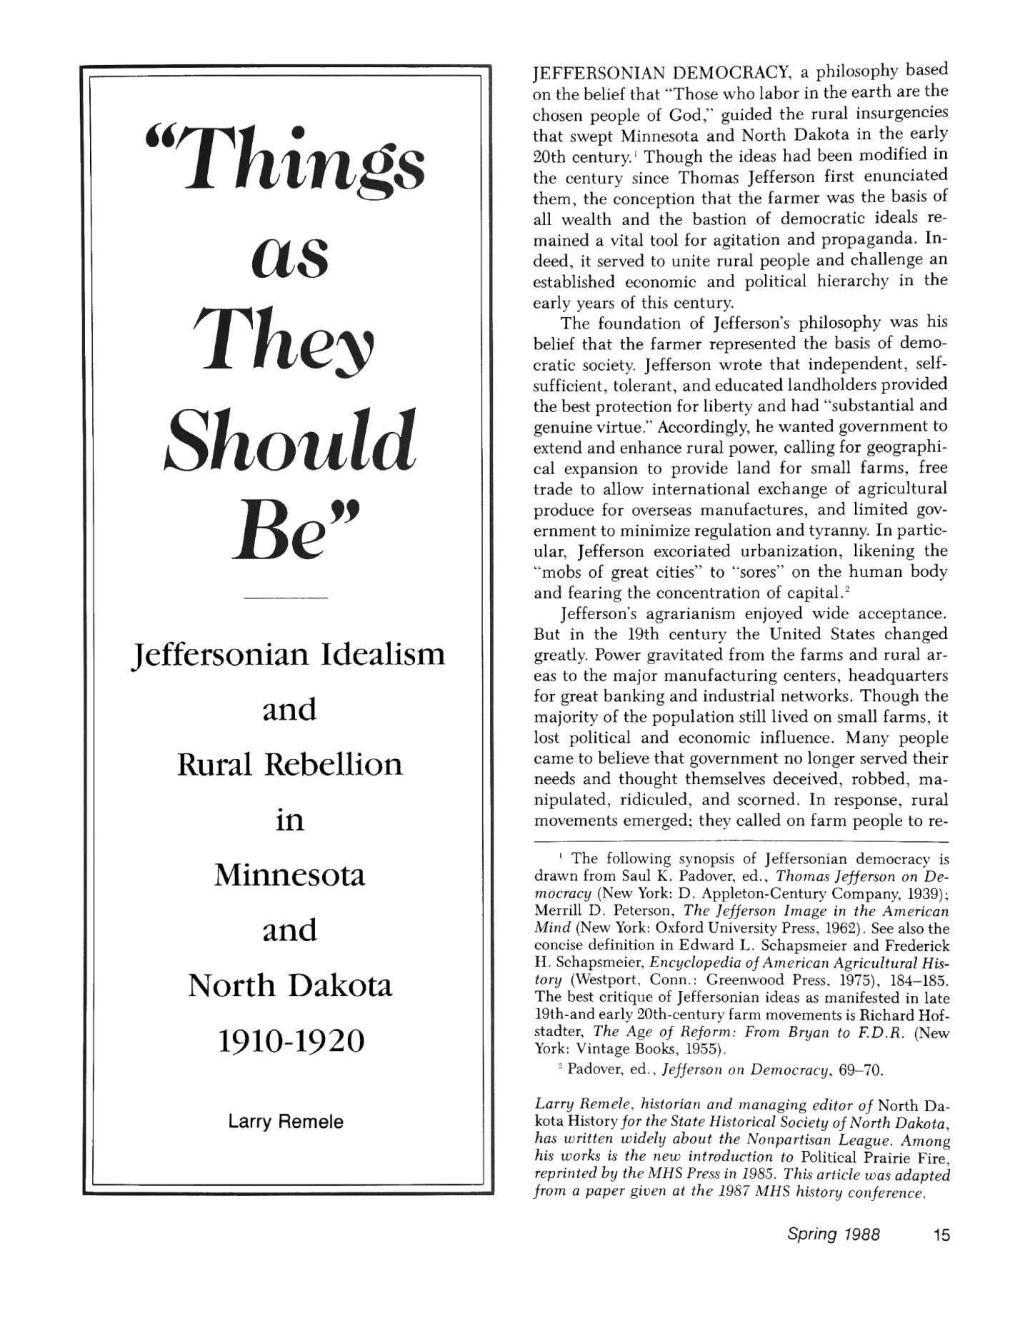 Jeffersonian Idealism and Rural Rebellion in Minnesota and North